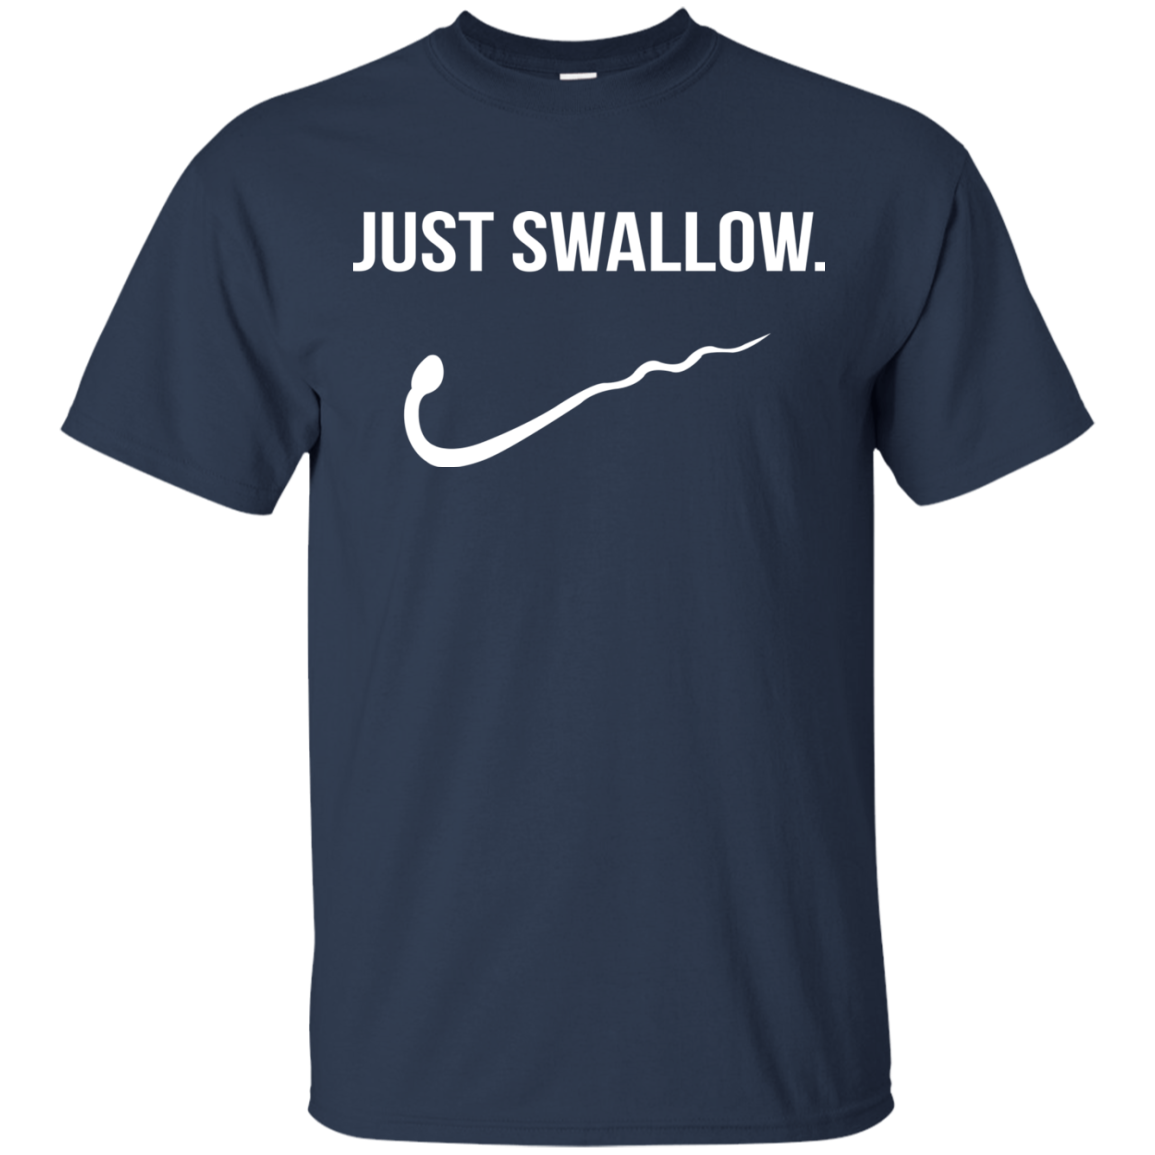 Justswallow.co